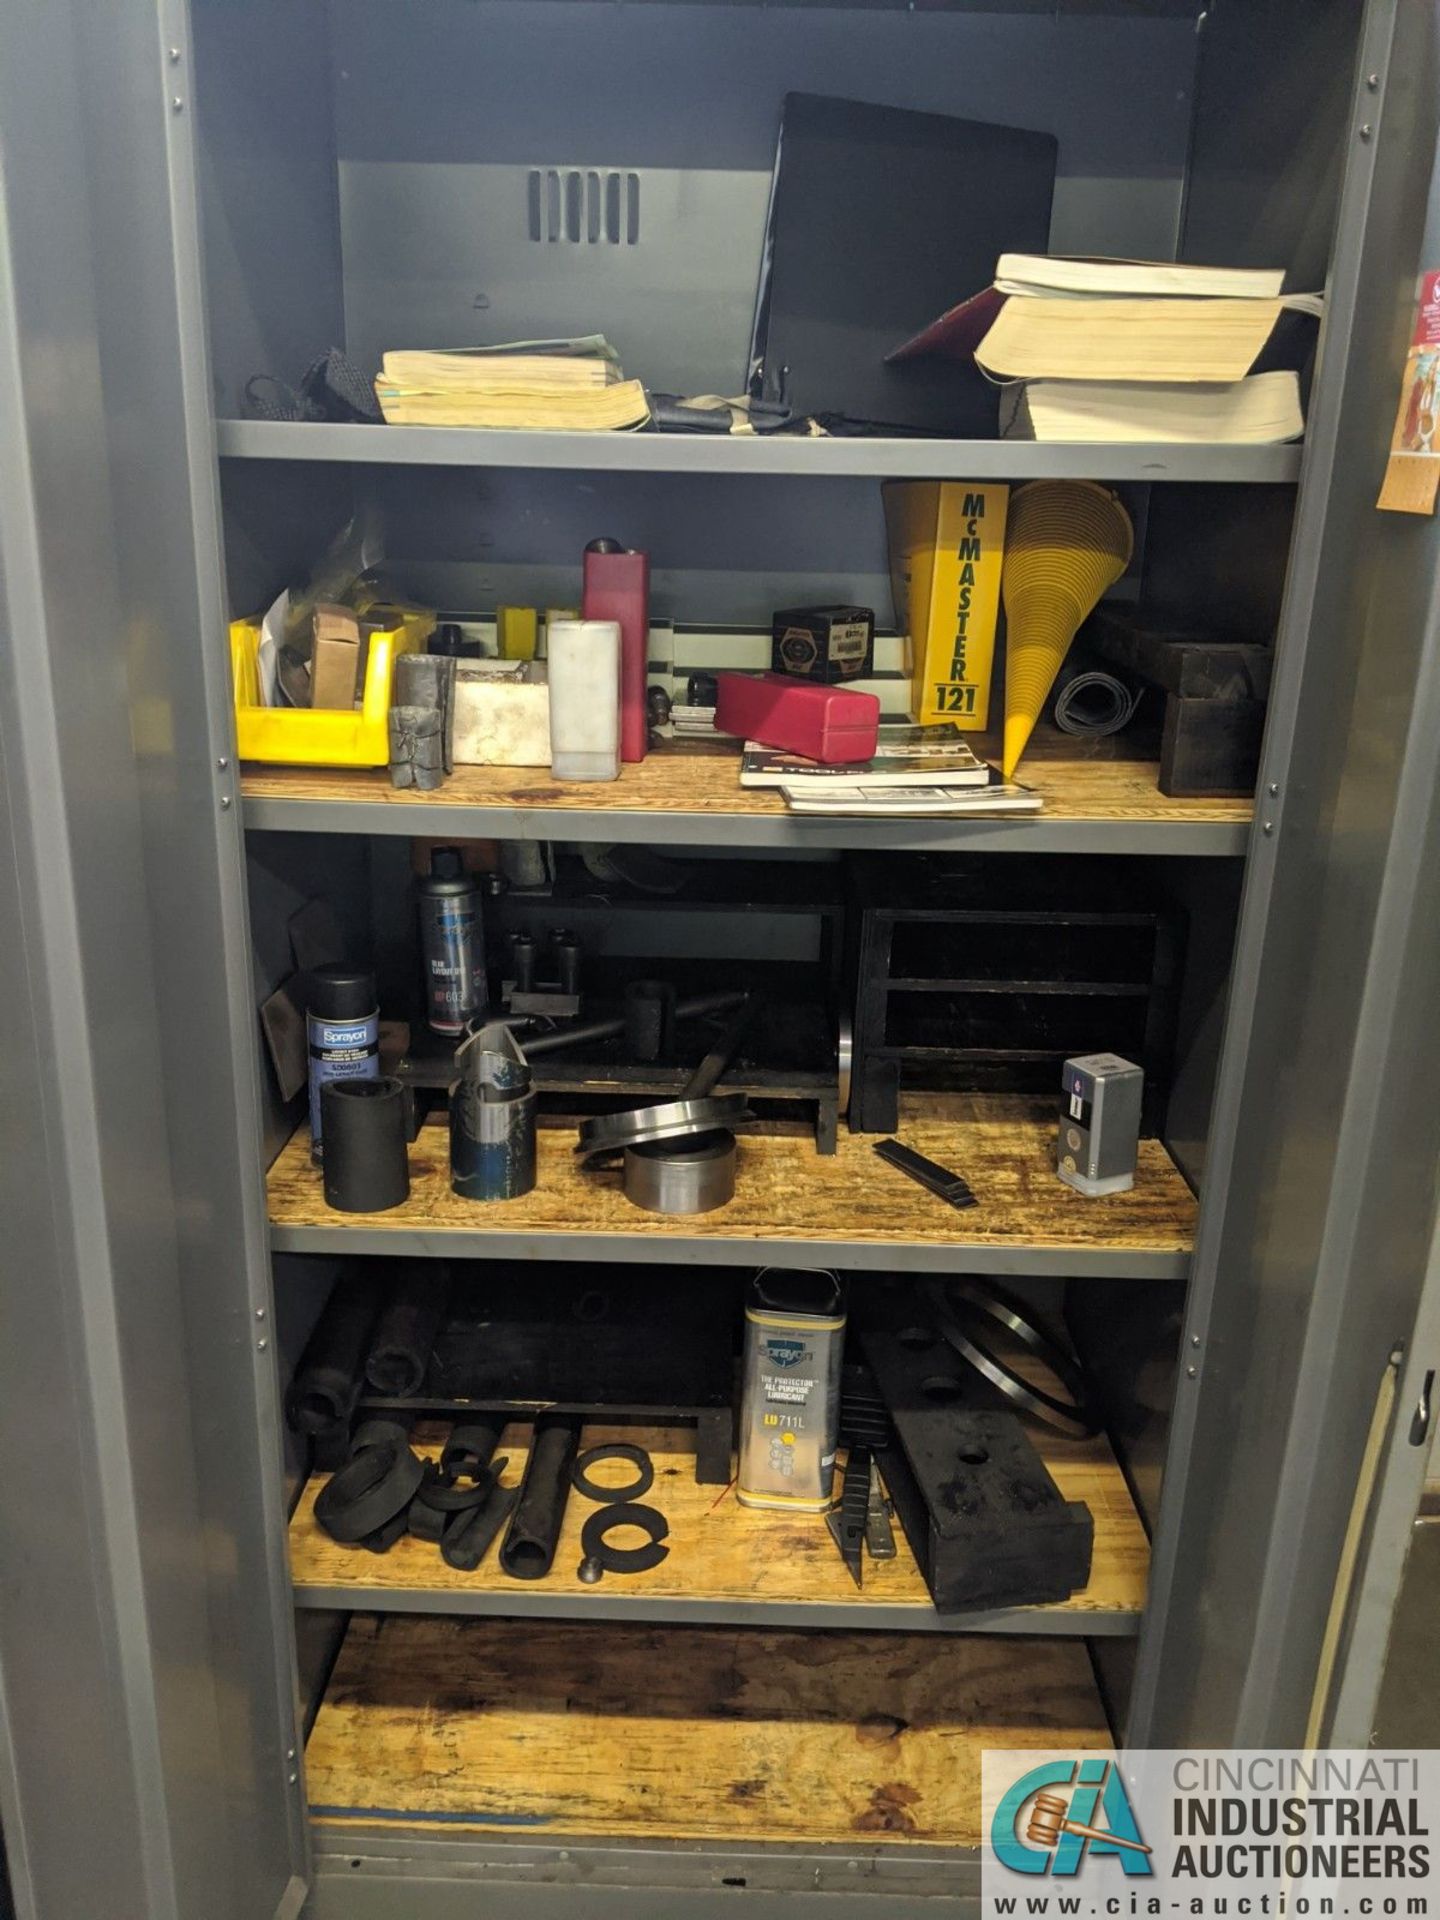 (LOT) 2-DOOR CABINET WITH MACHINE PARTS AND ACCESSORIES - Image 2 of 2